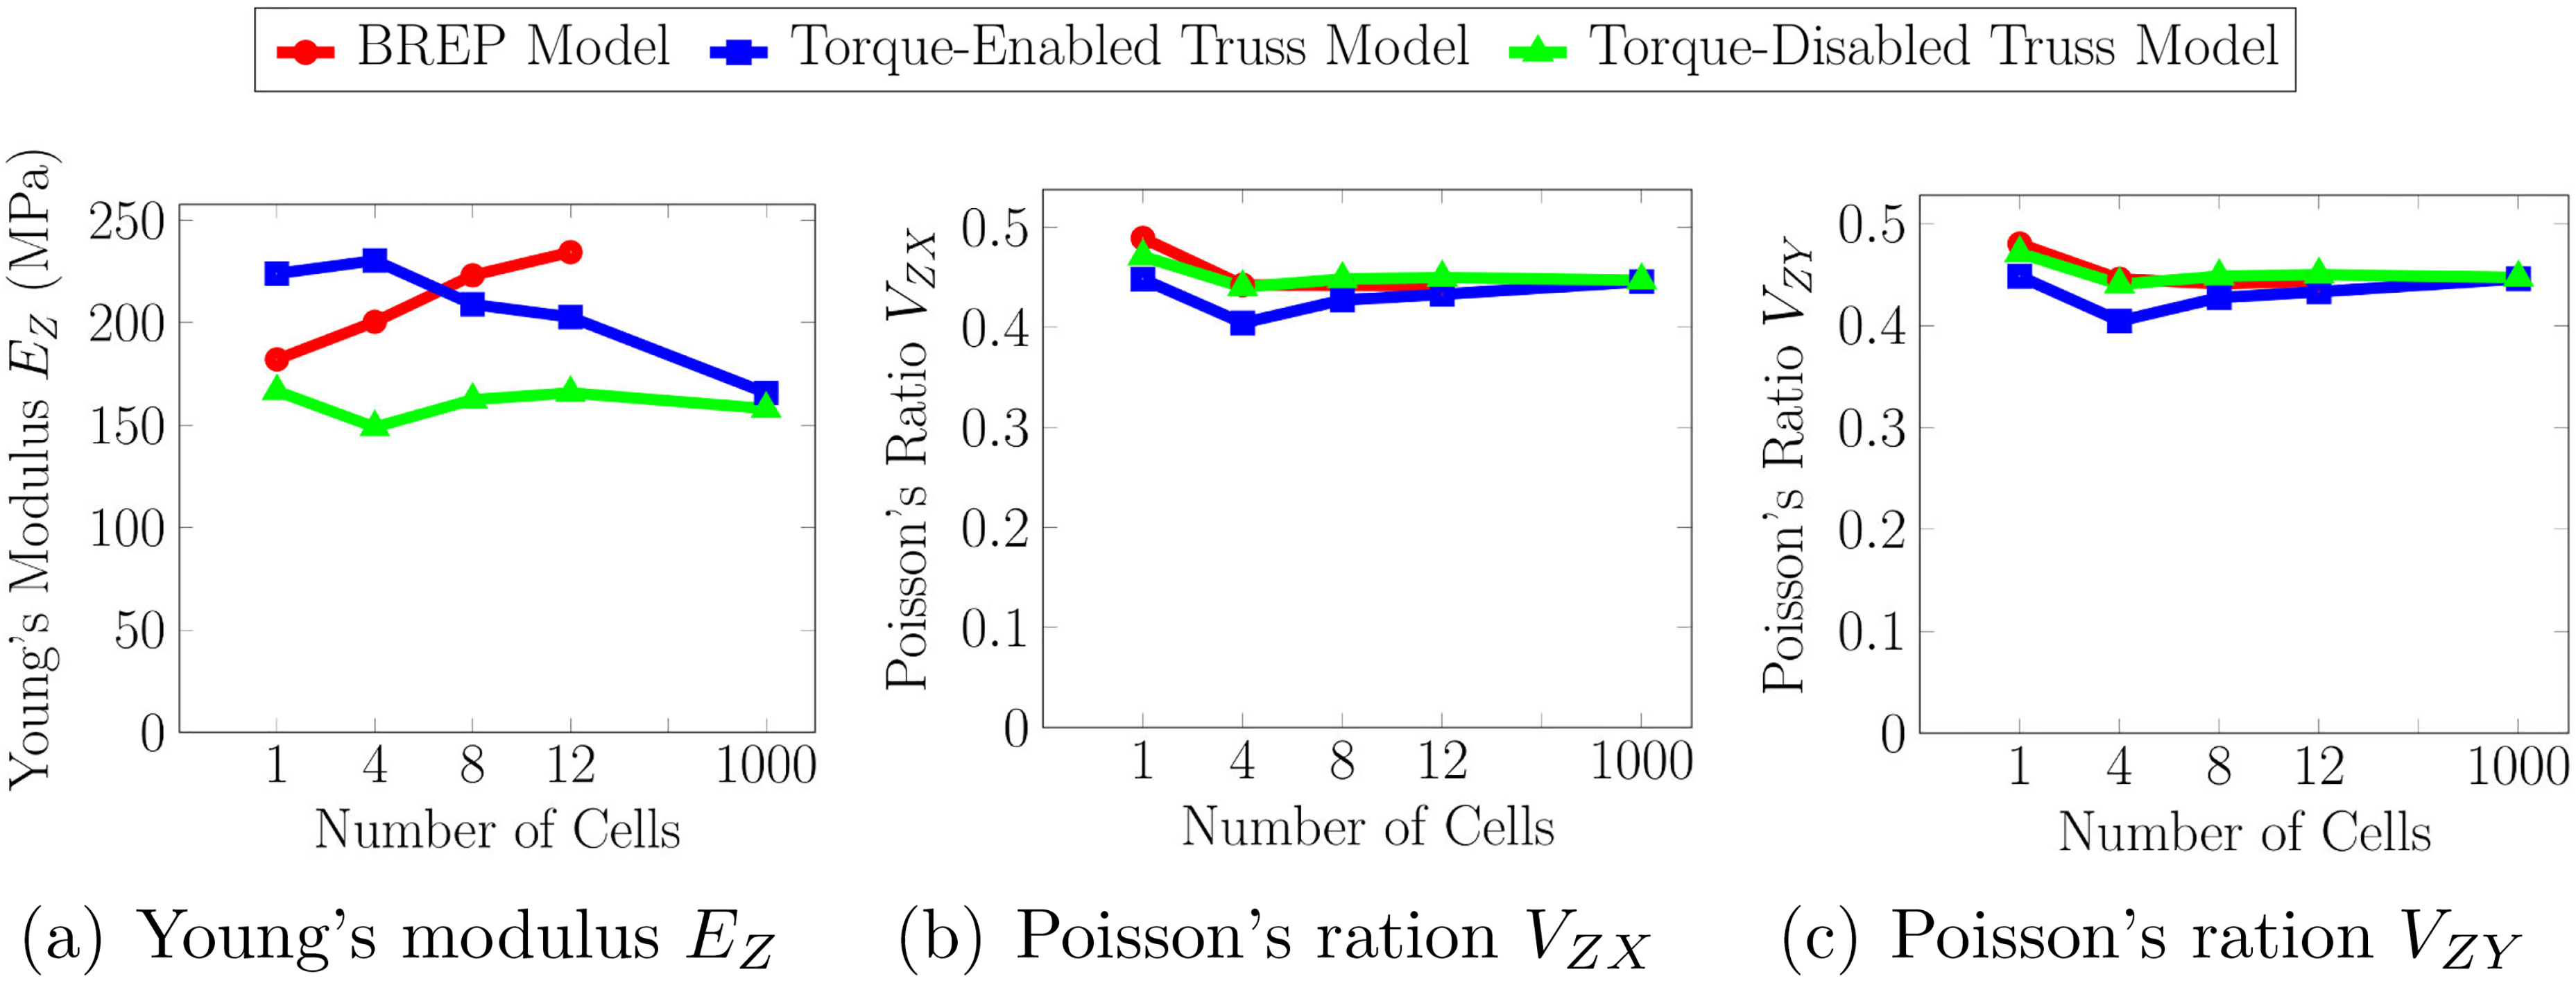 Estimations of the Young’s modulus and Poisson’s ratio using the (a) BREP model, (b) Torque-enabled Truss model and, (c) Torque-disabled Truss model.